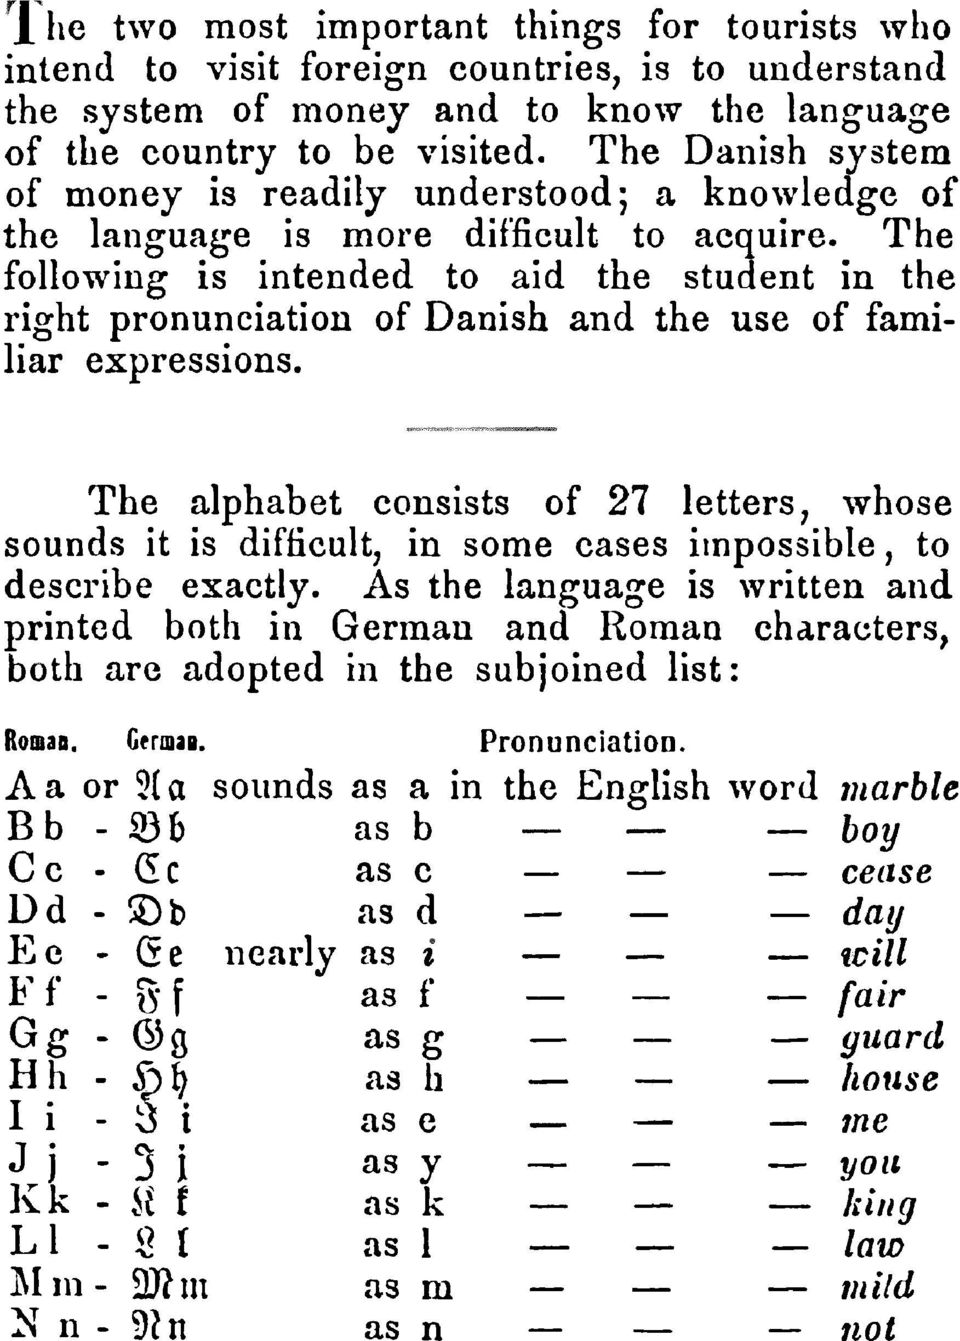 The lphbet consists of 27 letters, whose sounds it is difficult,in some cses impossible to, describe exctly.